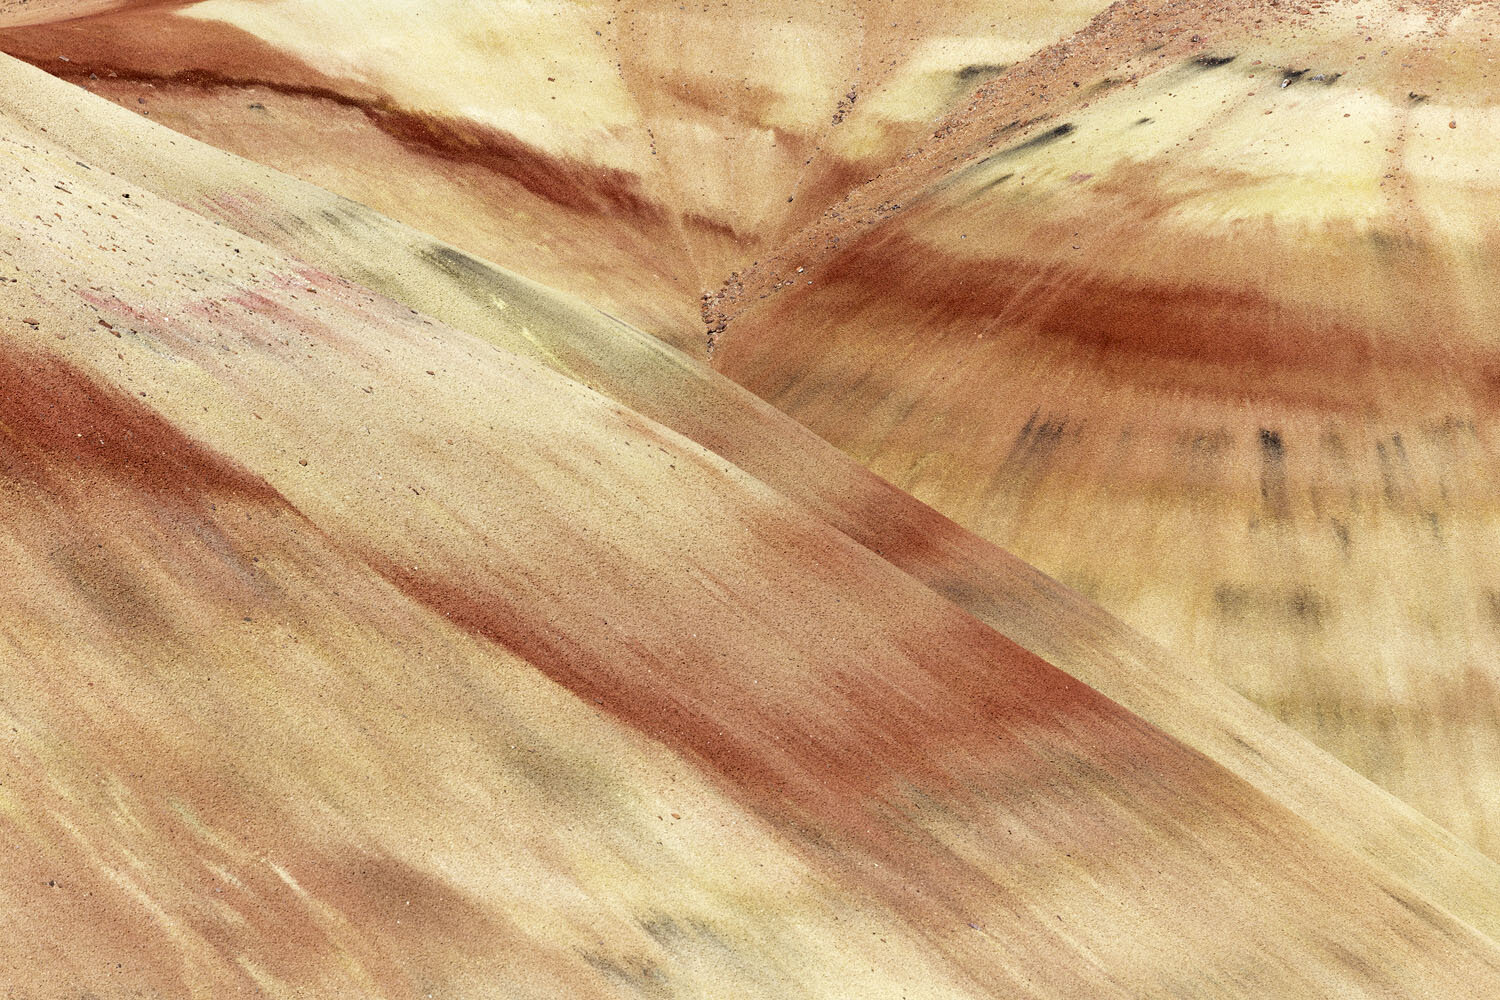 Painted Hills #6. John Day Fossil Beds National Monument, OR. 2016